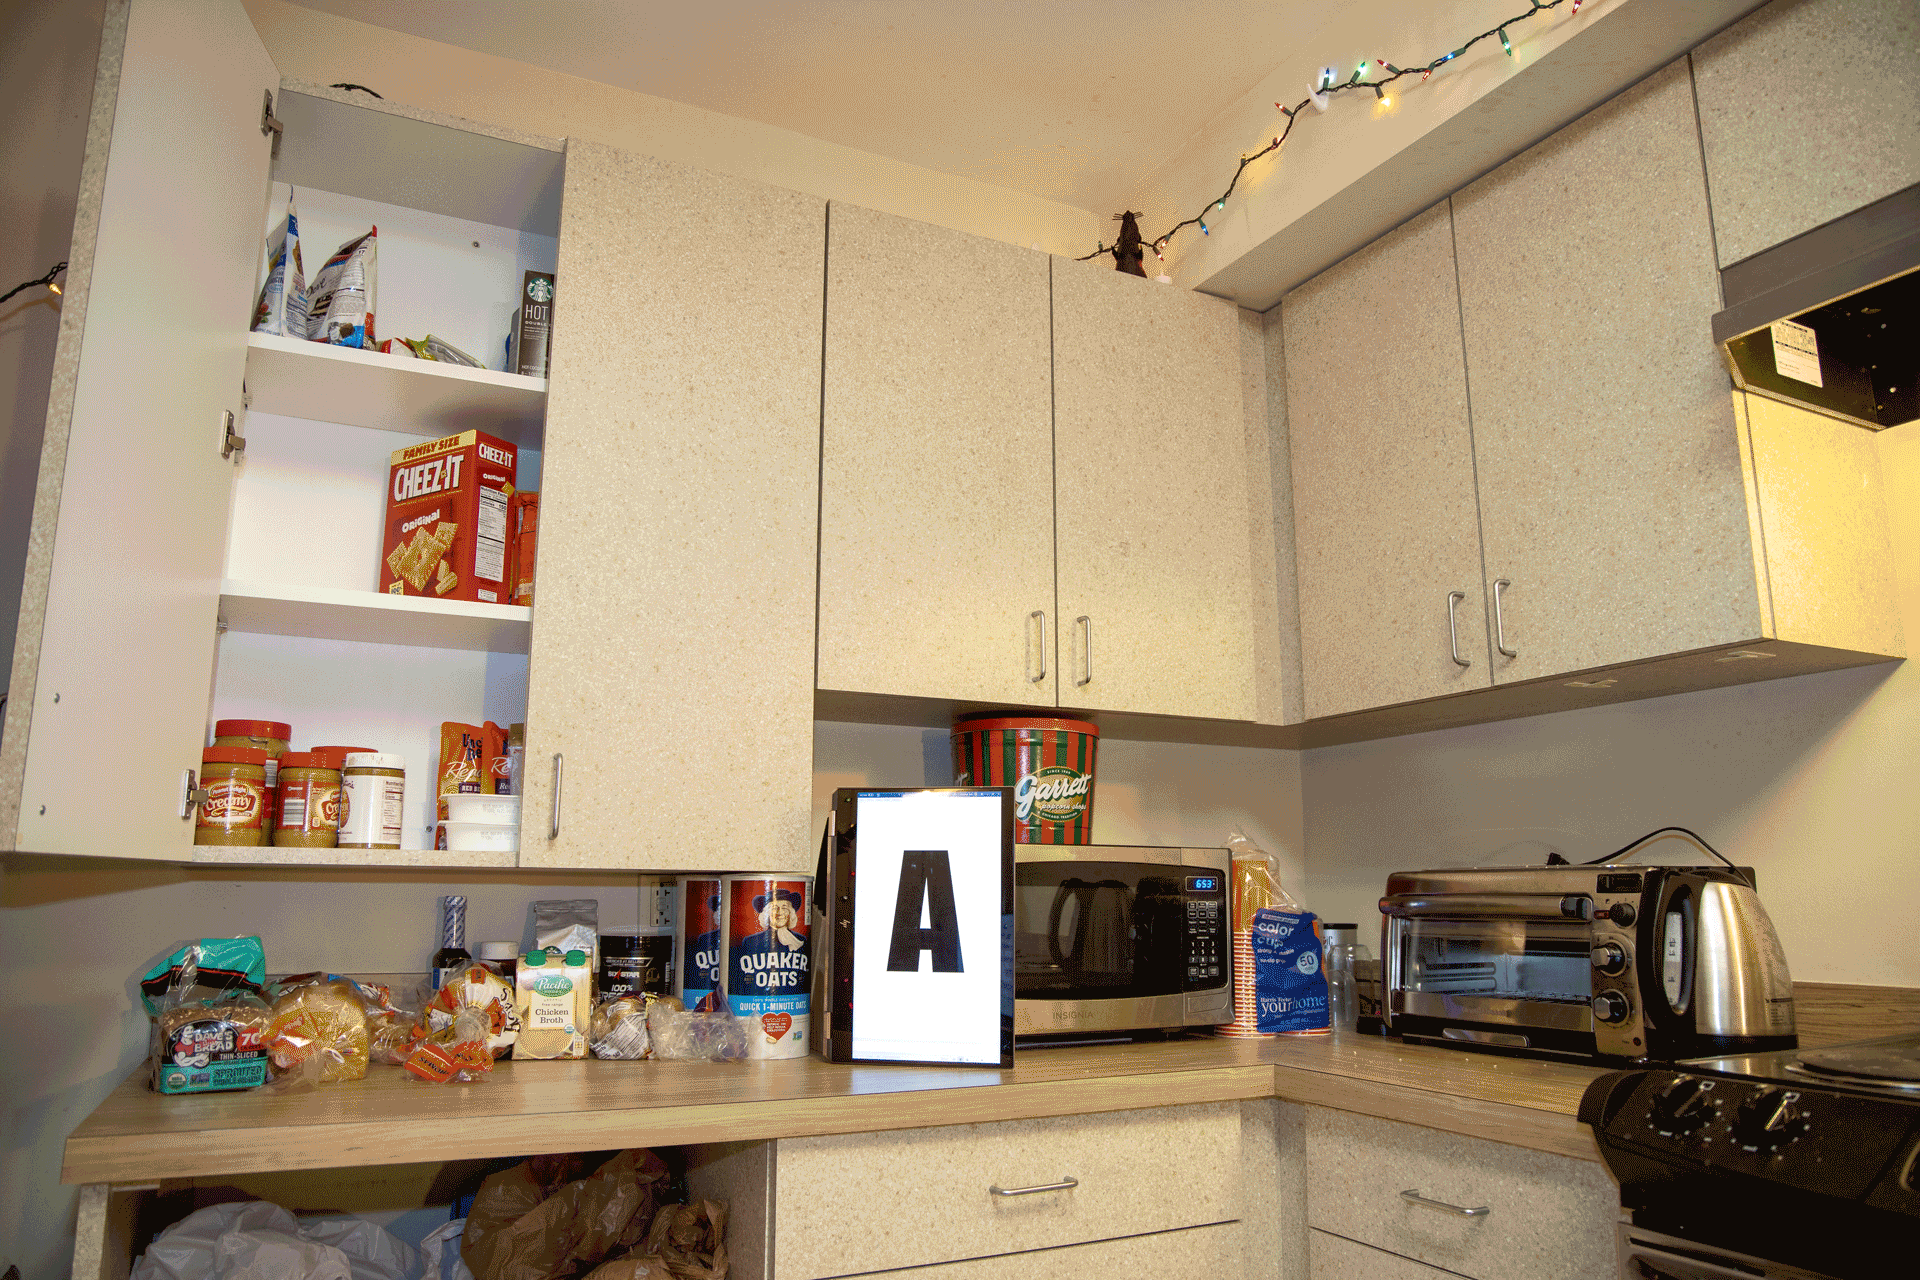 Depicts a kitchen, alternating which cabinet is open, with a computer display spelling out "ART???"